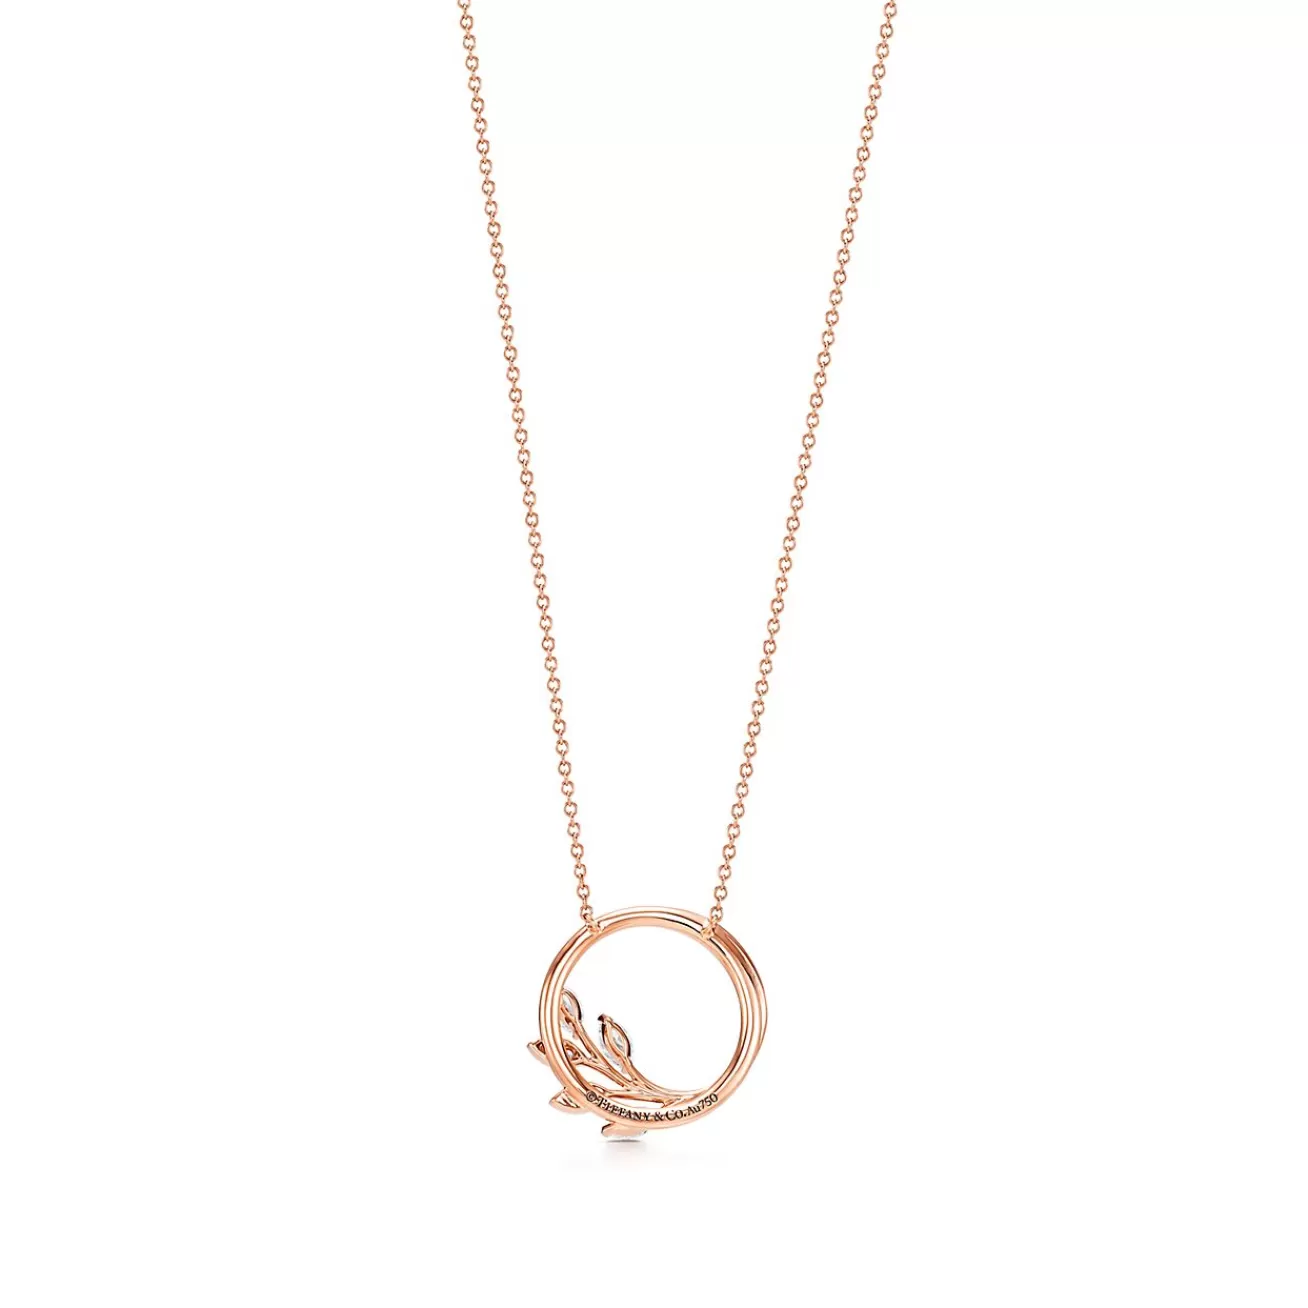 Tiffany & Co. Tiffany Victoria® diamond vine circle pendant in 18k rose gold, small. | ^ Necklaces & Pendants | Gifts for Her